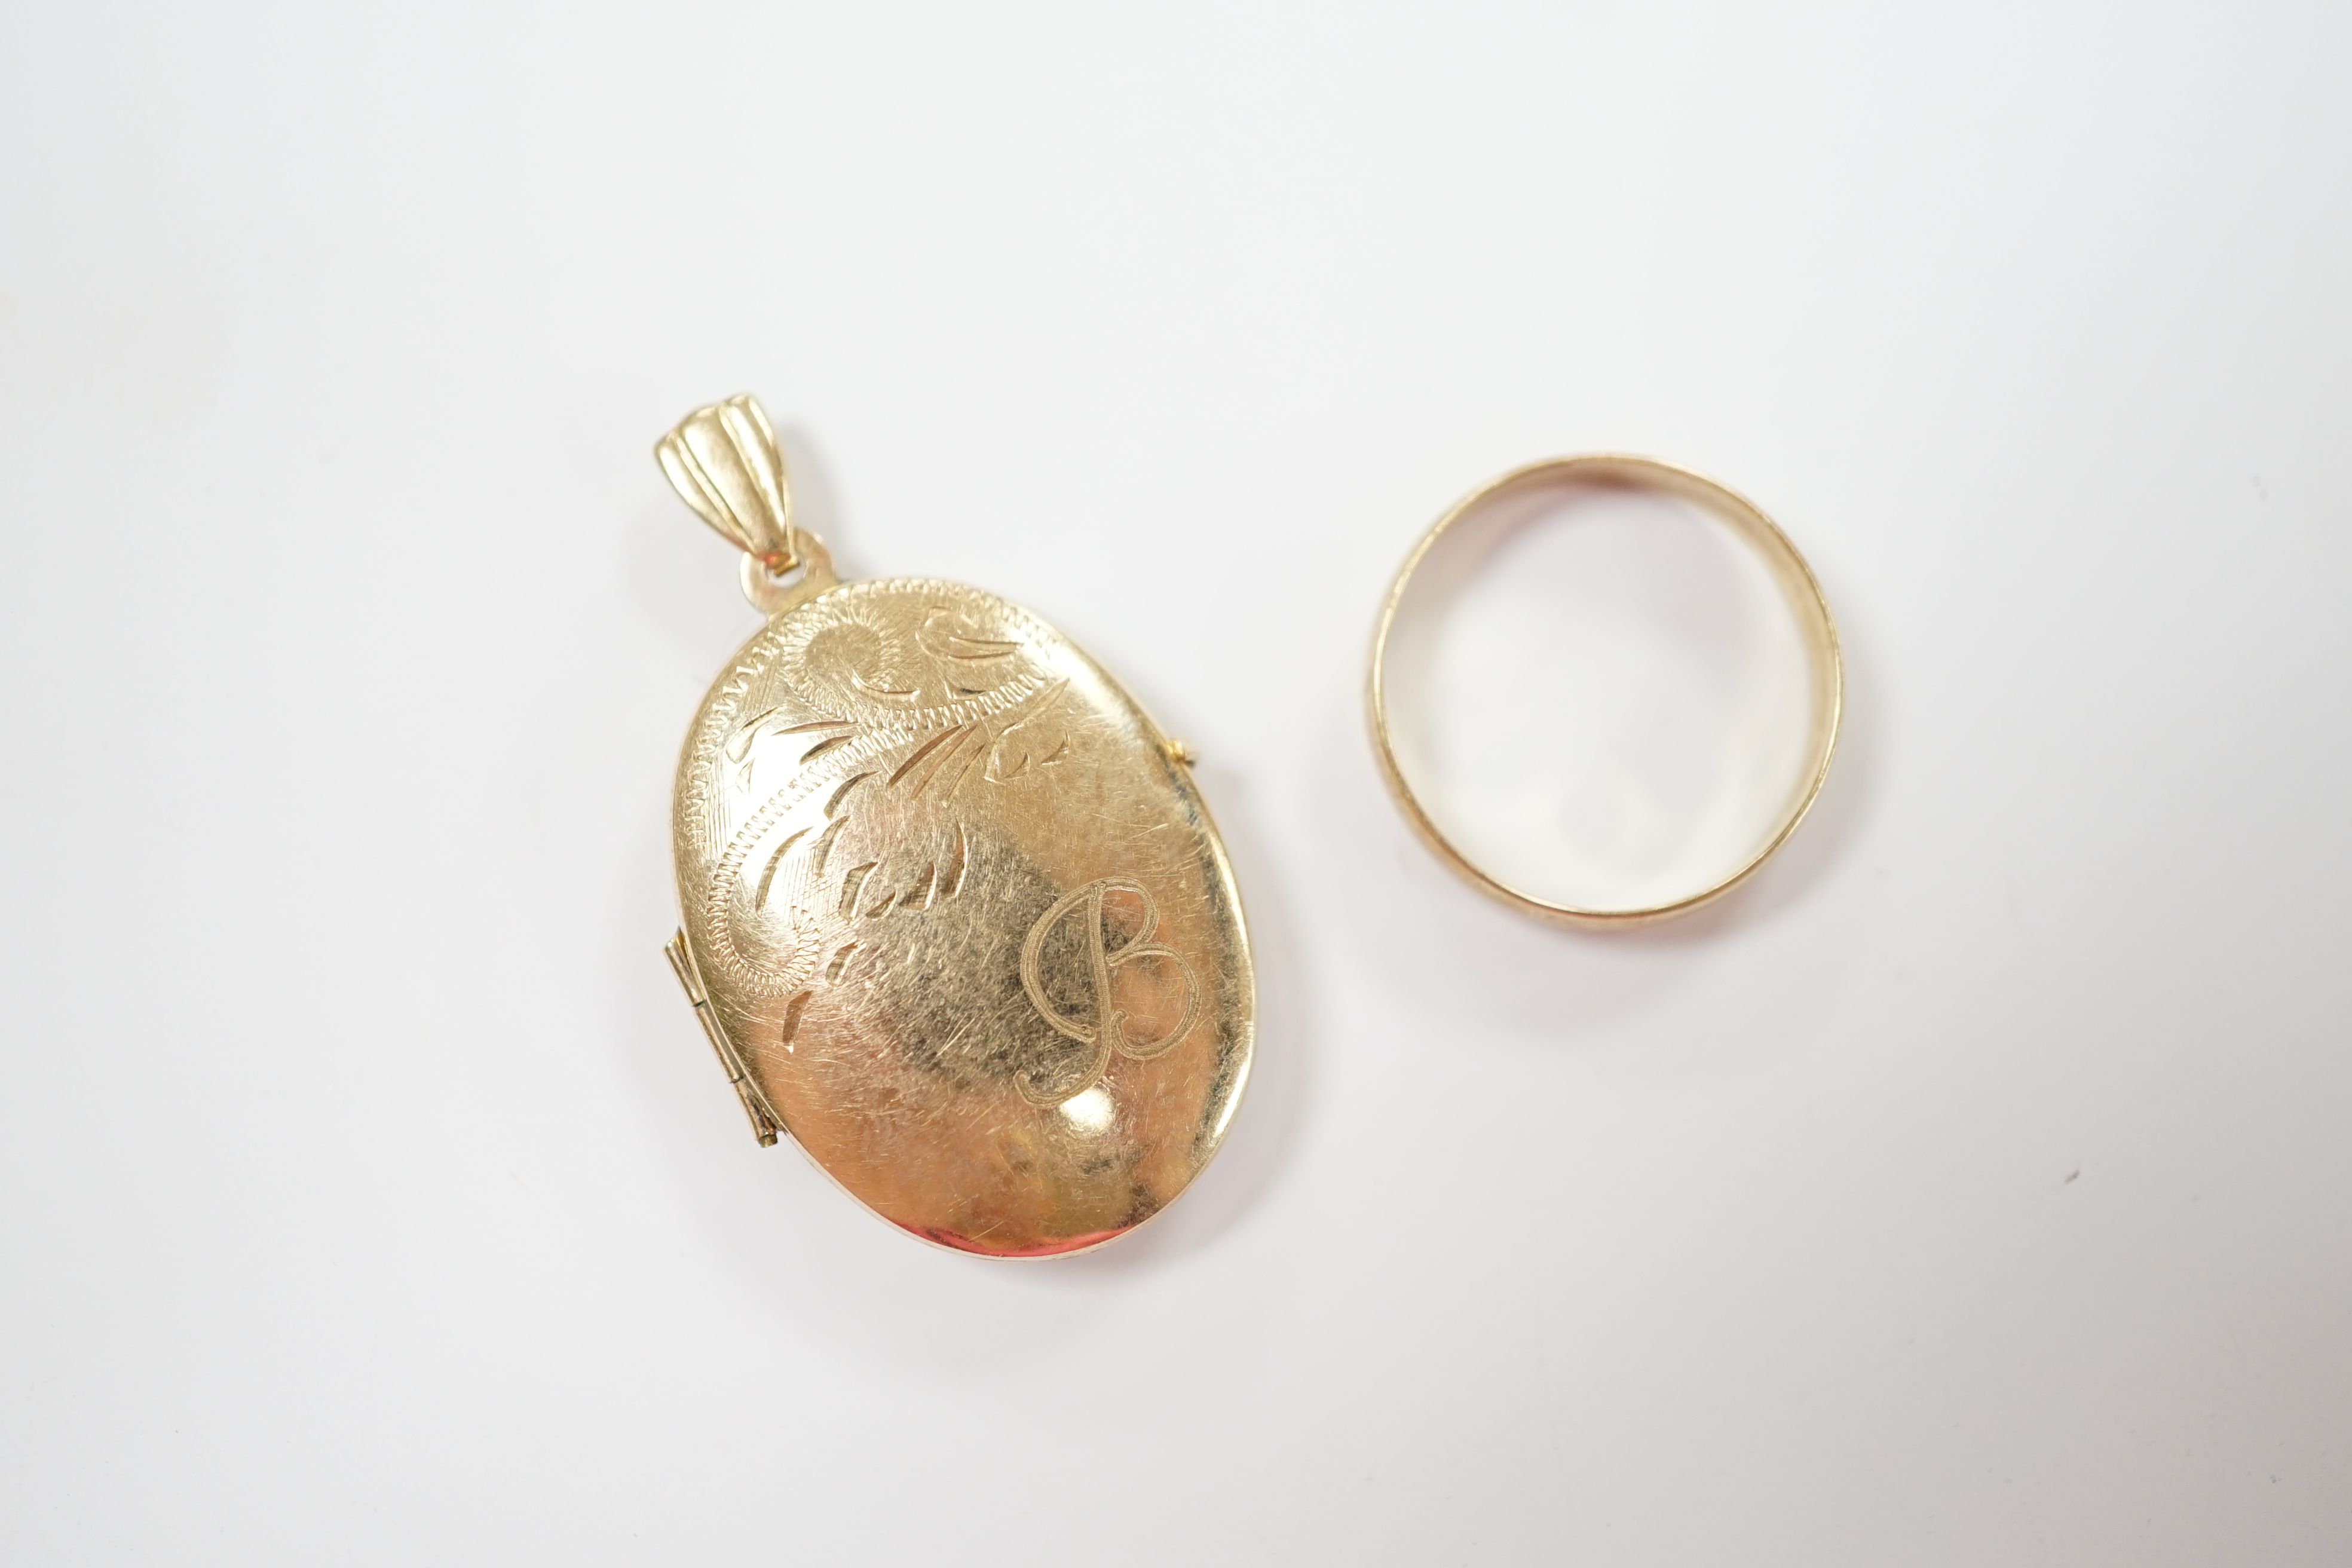 A 9ct gold wedding band and a modern 9ct gold oval locket